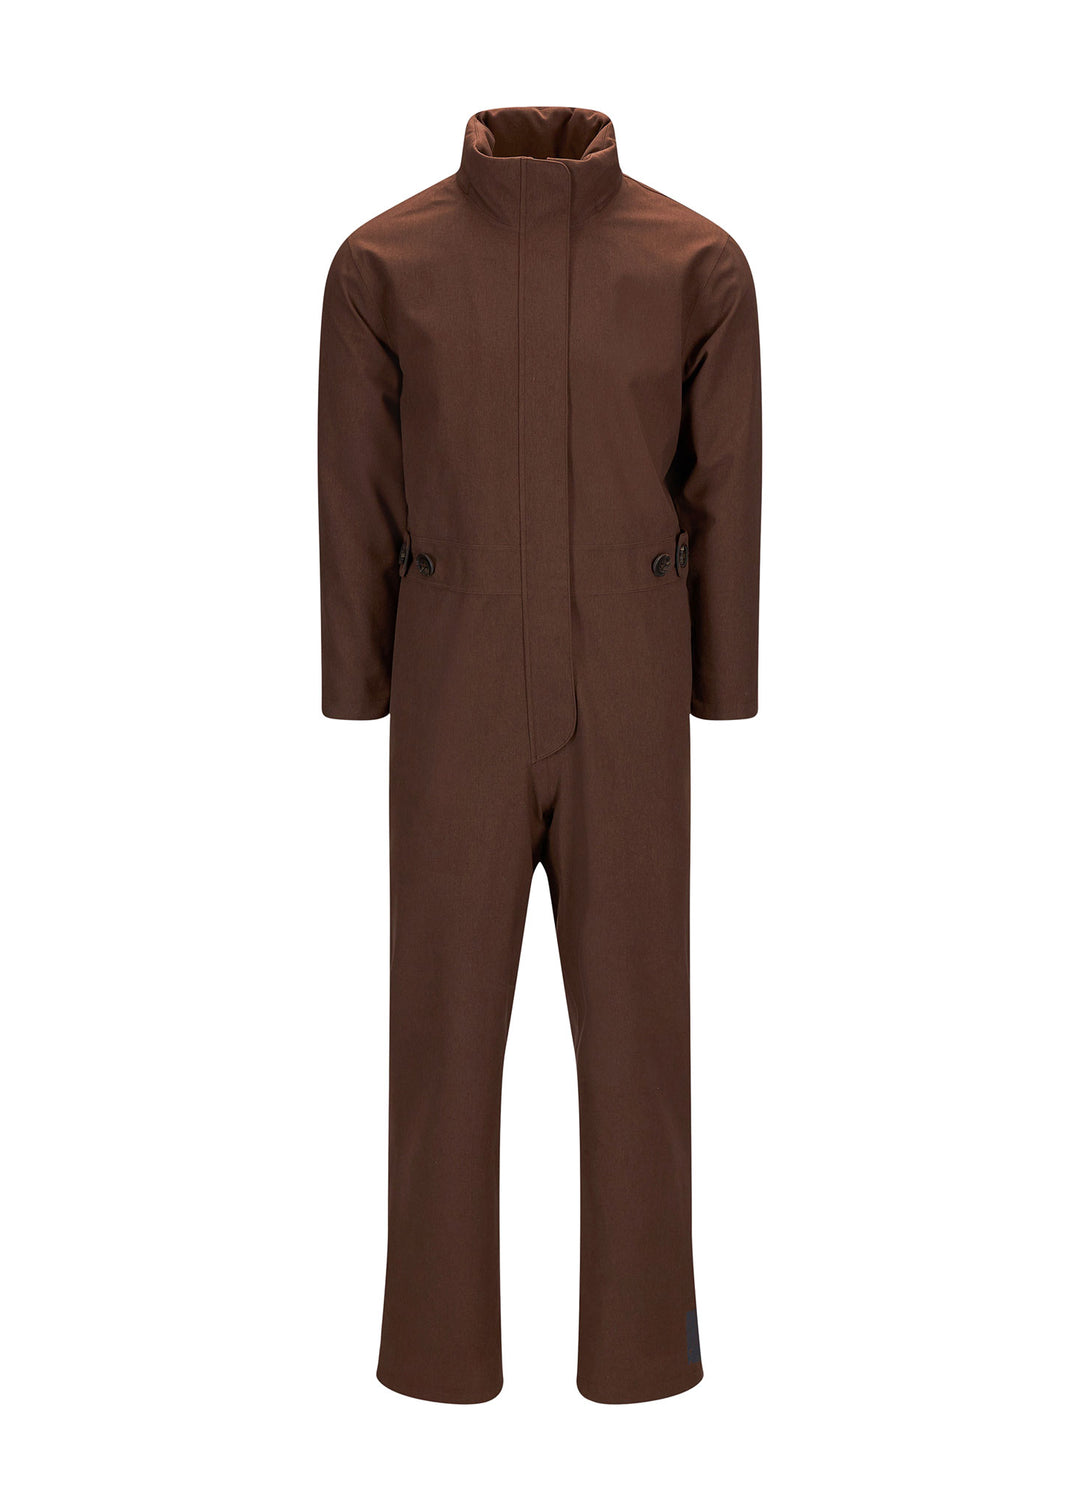 BRGN by Lunde & Gaundal Jetstrøm Jumpsuit Coats 187 Chocolate Brown